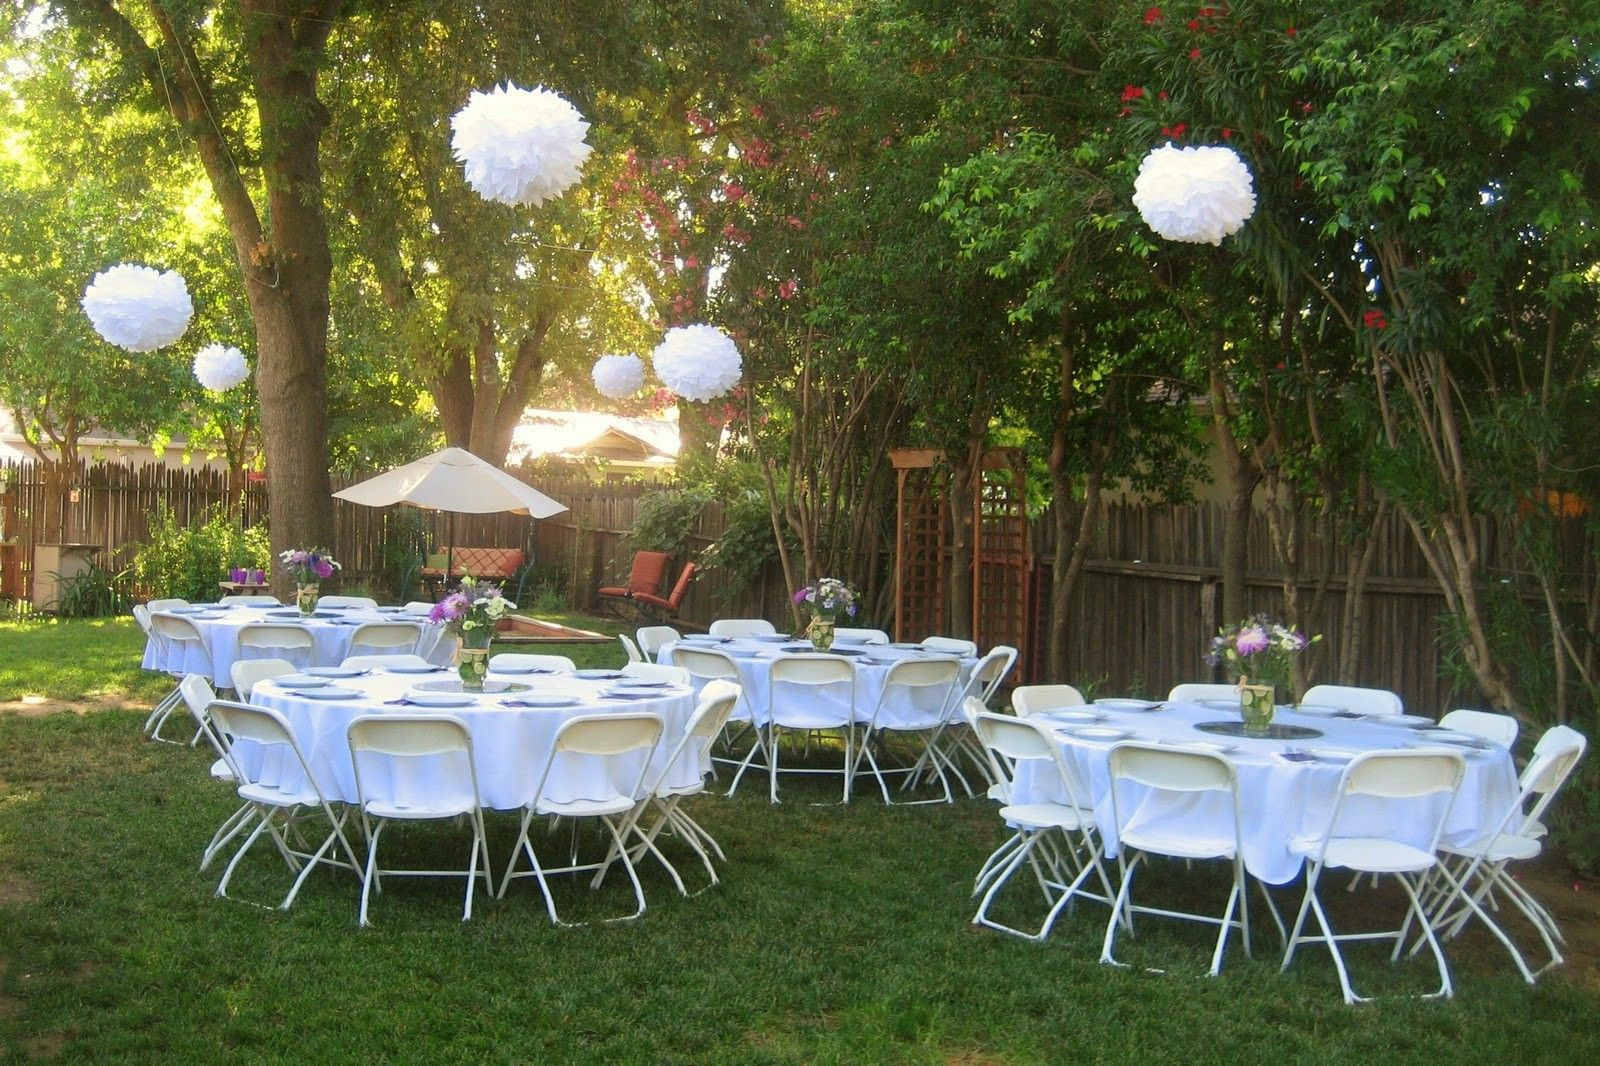 Engagement Party Decorating Ideas On A Budget
 Our Backyard Wedding reception on a tight bud